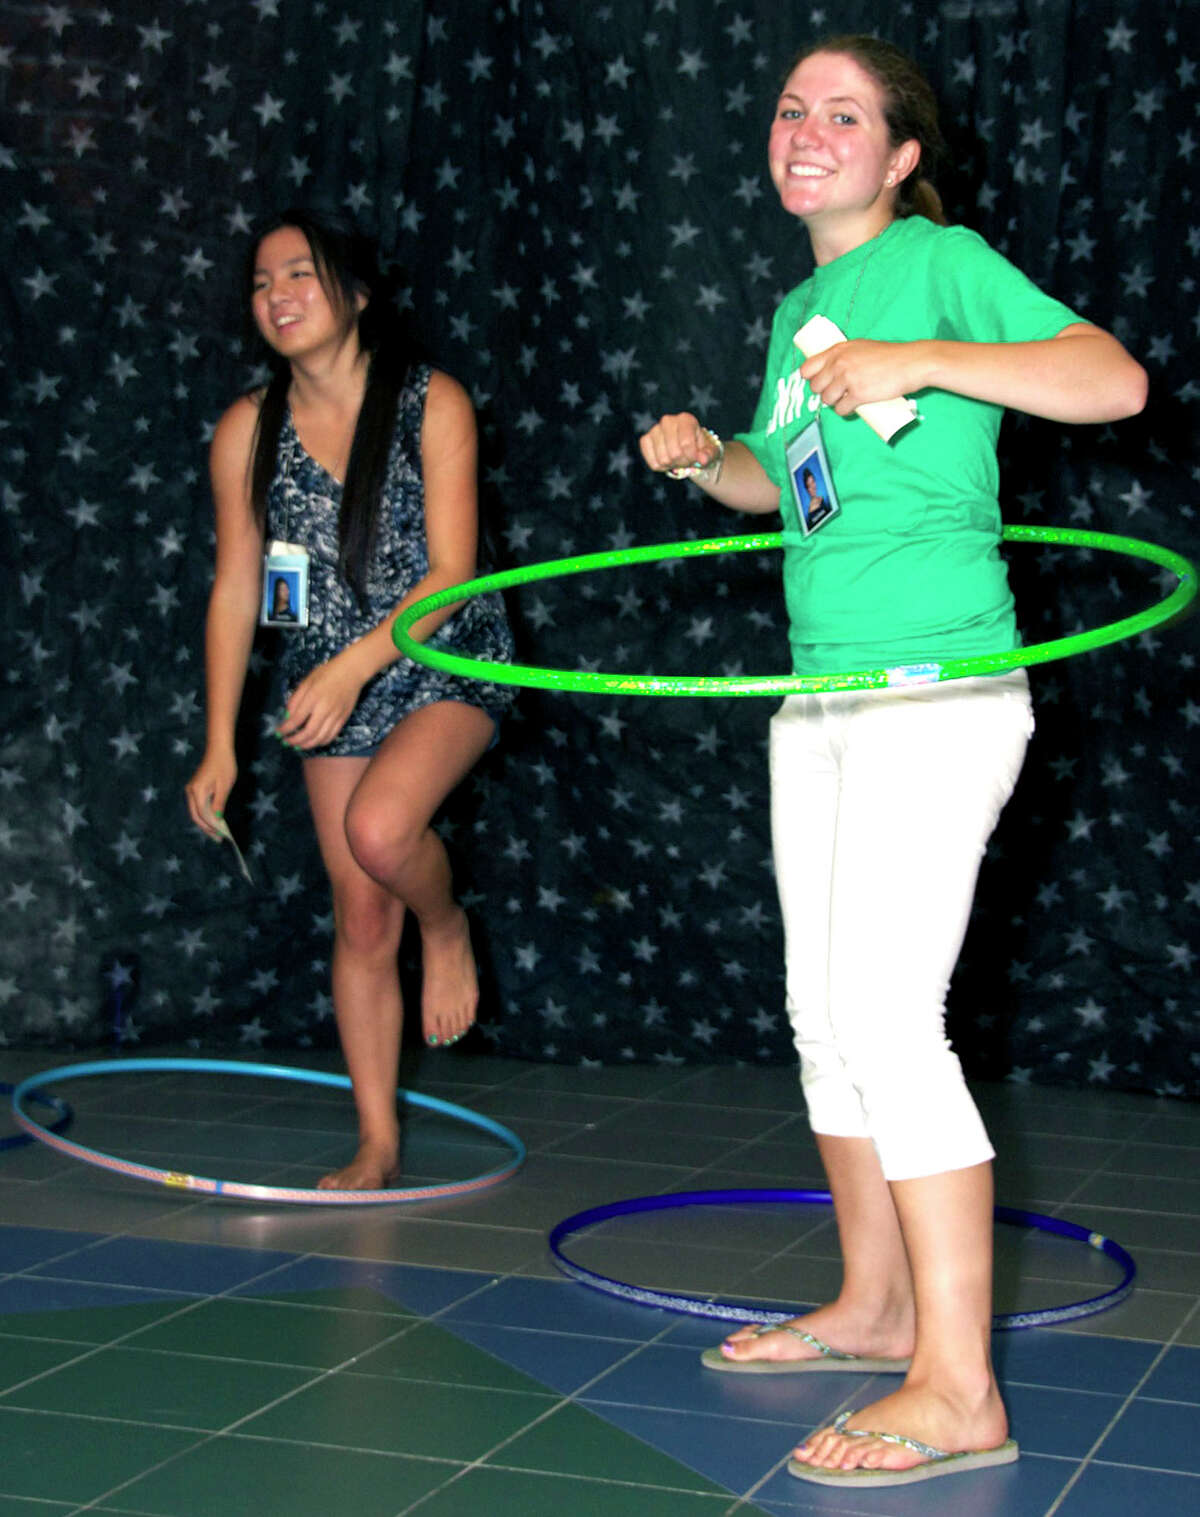 Faith Eherts demonstrates her prowess with the Hula Hoop while Annie Mao's effort meets its demise during the New Milford High School Grad Party, June 23, 2012 at the school.